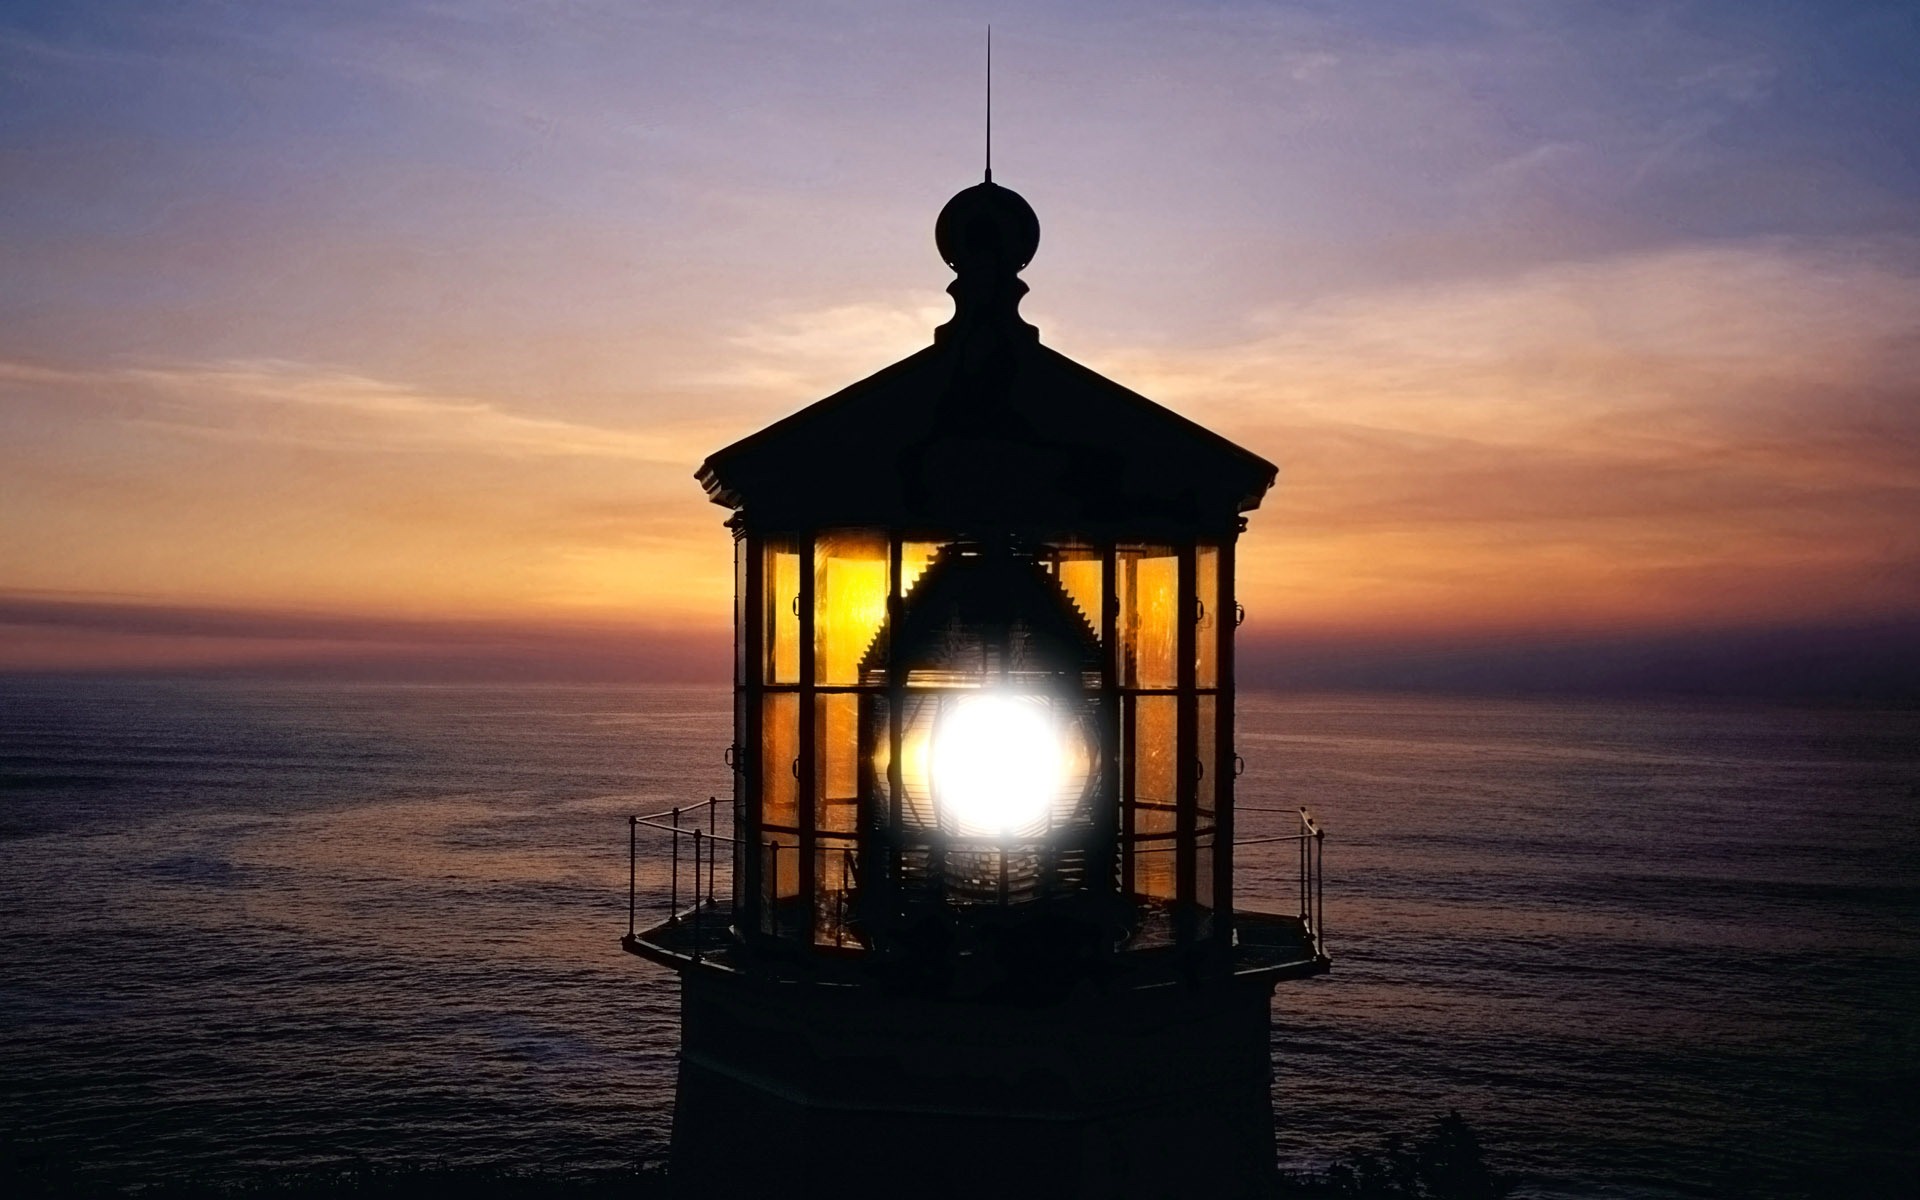 Windows 7 Wallpapers: Lighthouses #8 - 1920x1200